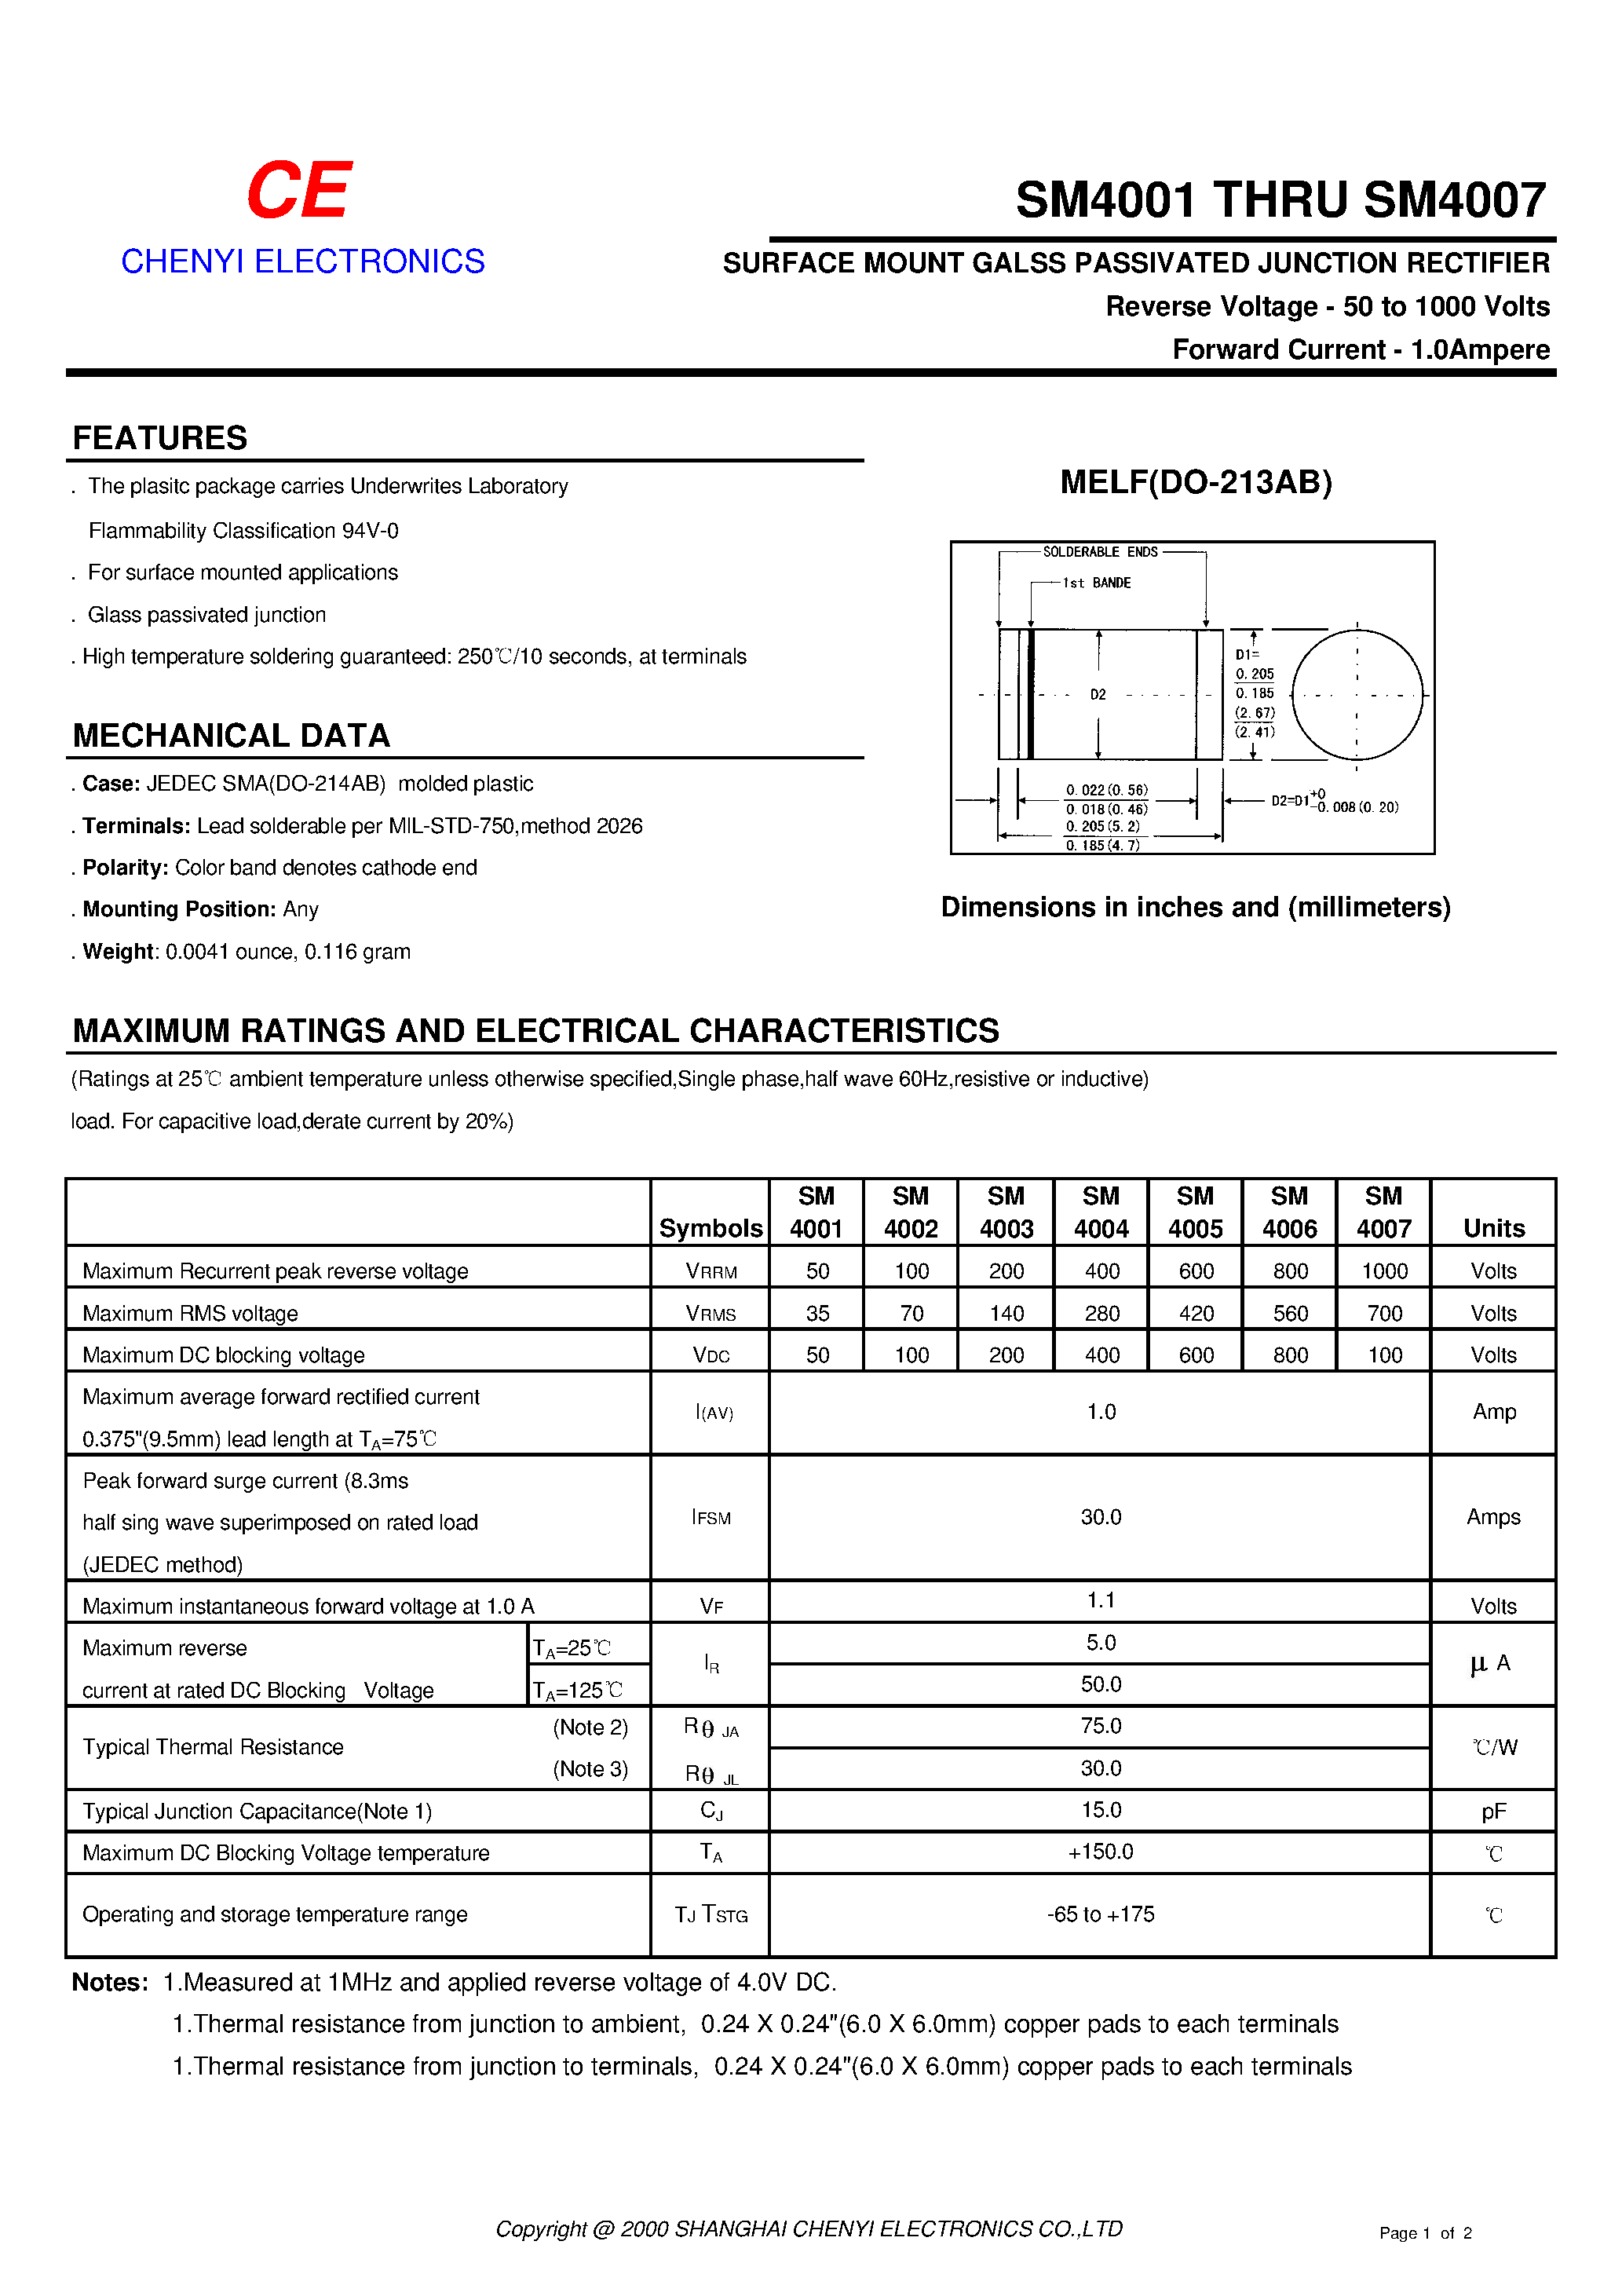 Даташит SM4001 - SURFACE MOUNT GALSS PASSIVATED JUNCTION RECTIFIER страница 1